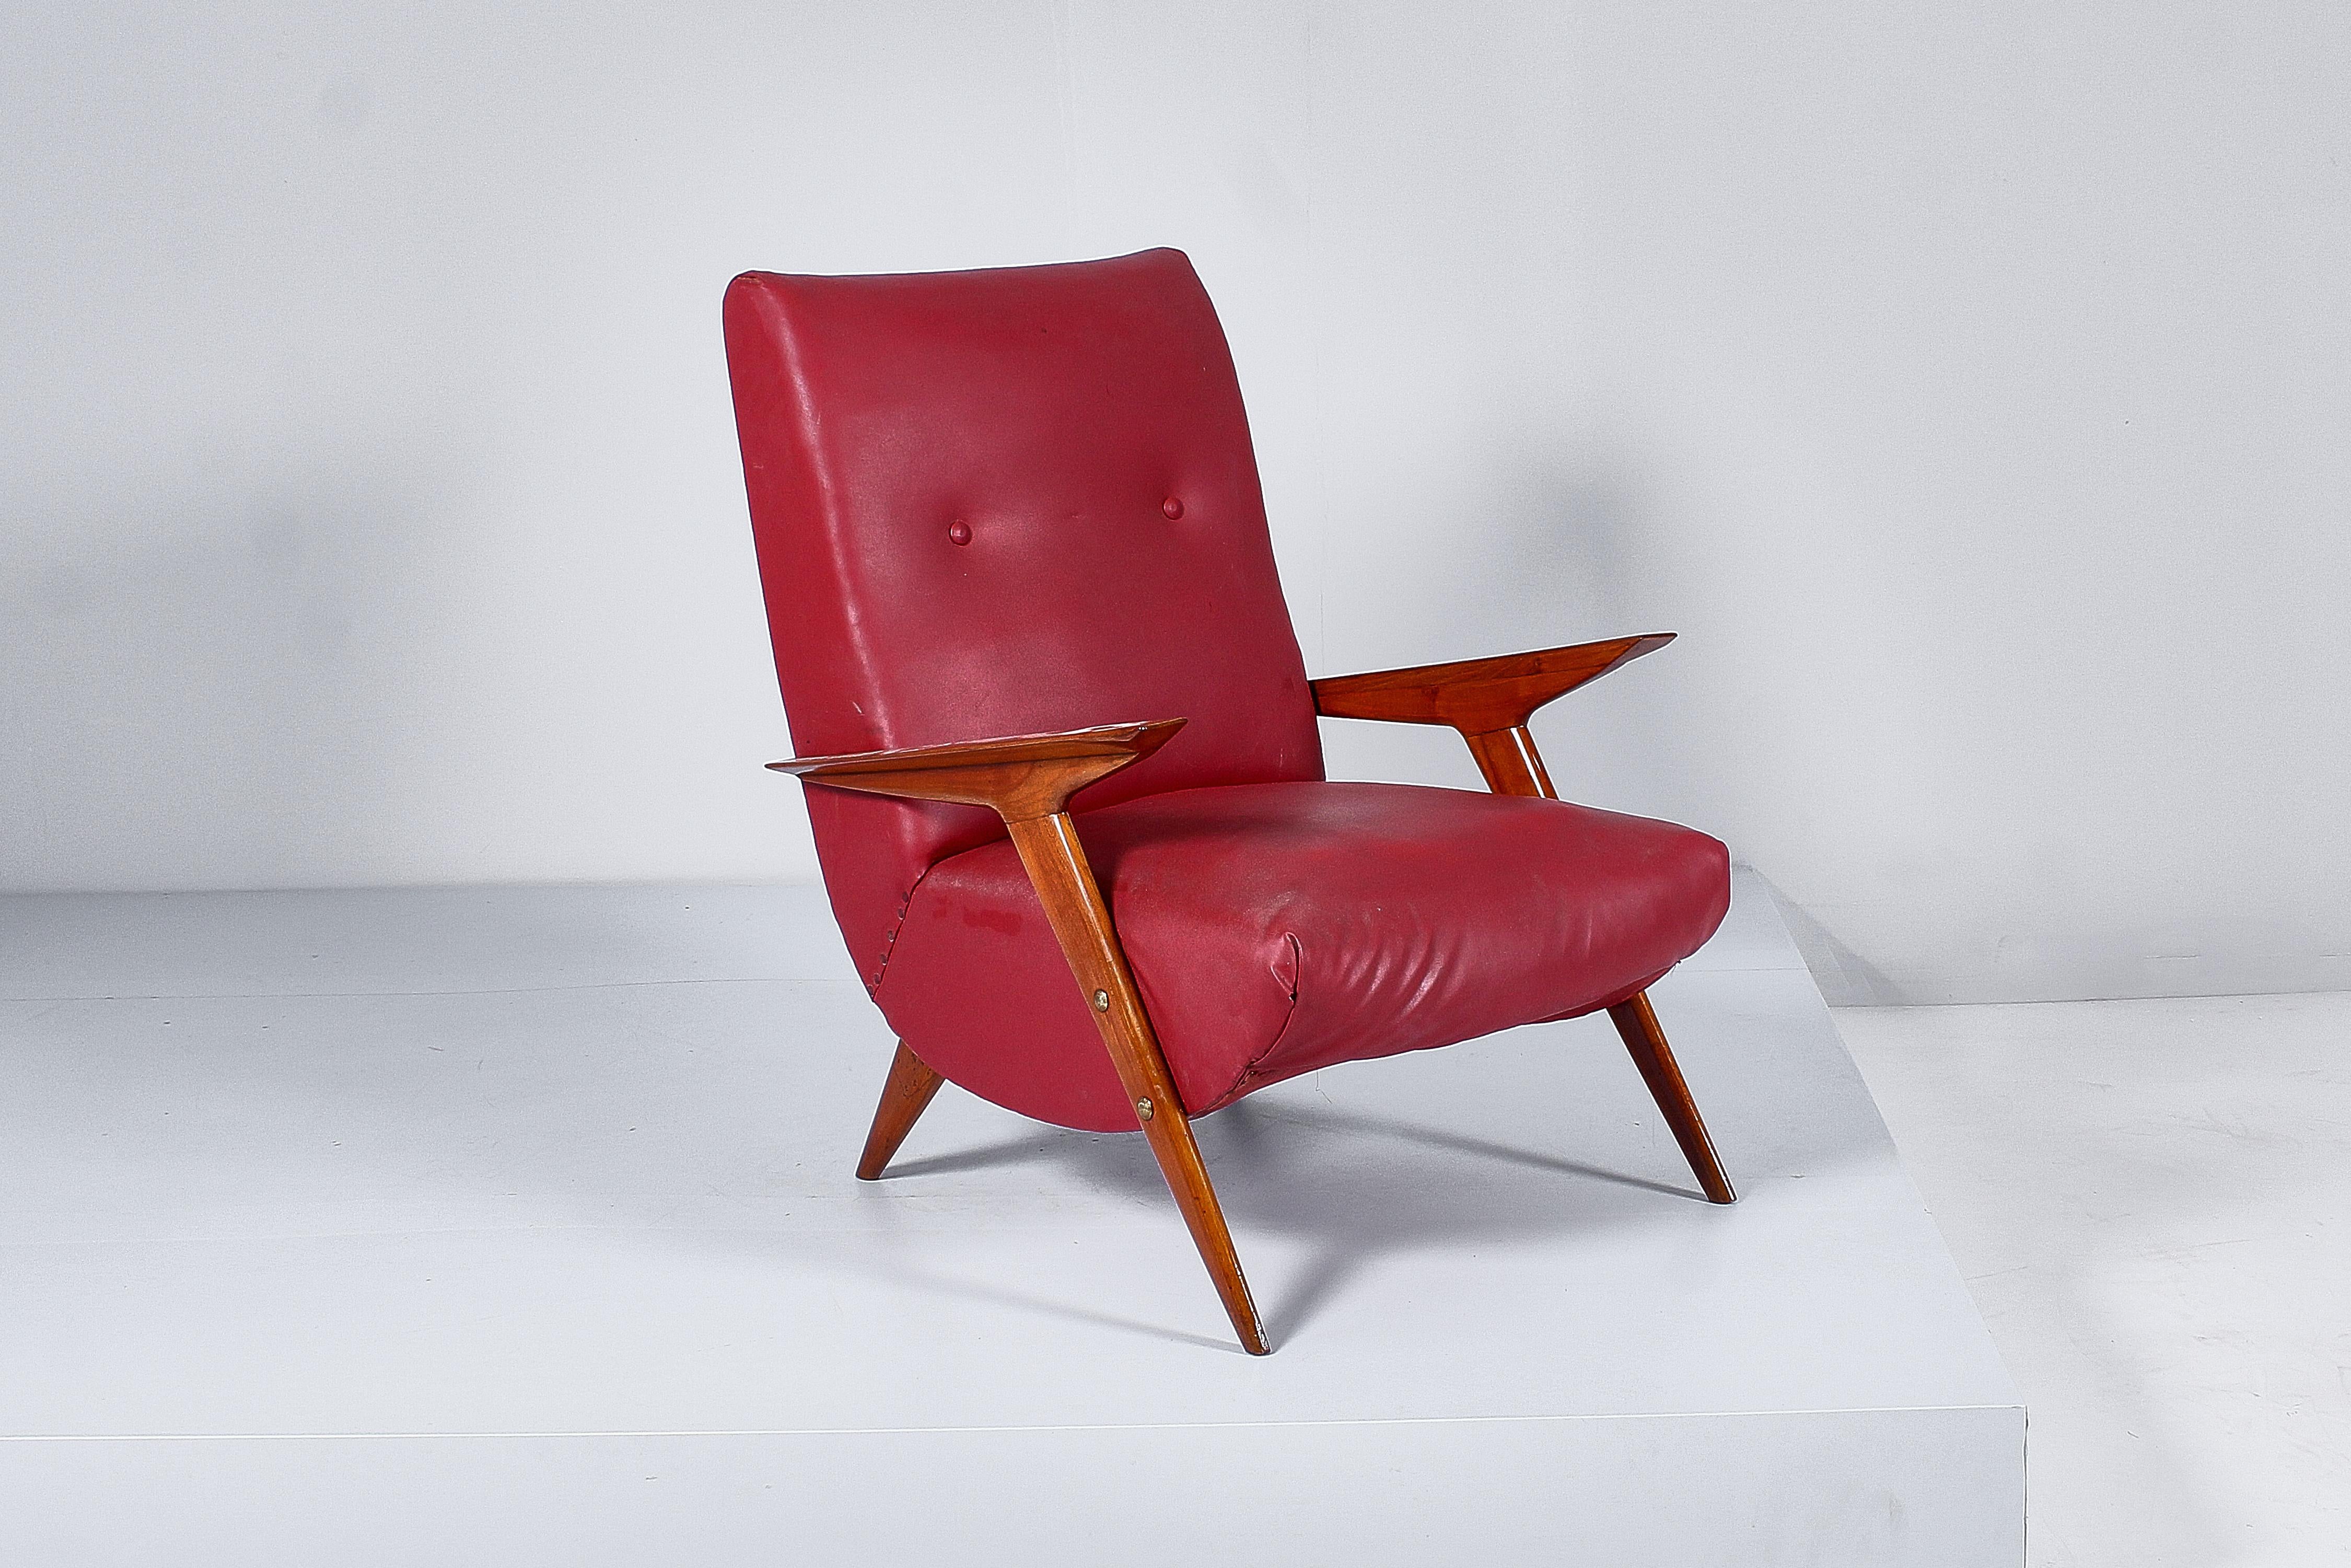 Very stylish armchair in wood and red leather, with a fine wooden structure with a geometric and shaped design. Attributable to Carlo Graffi, Italian production in the 50s.
Wear consistent with age and use.